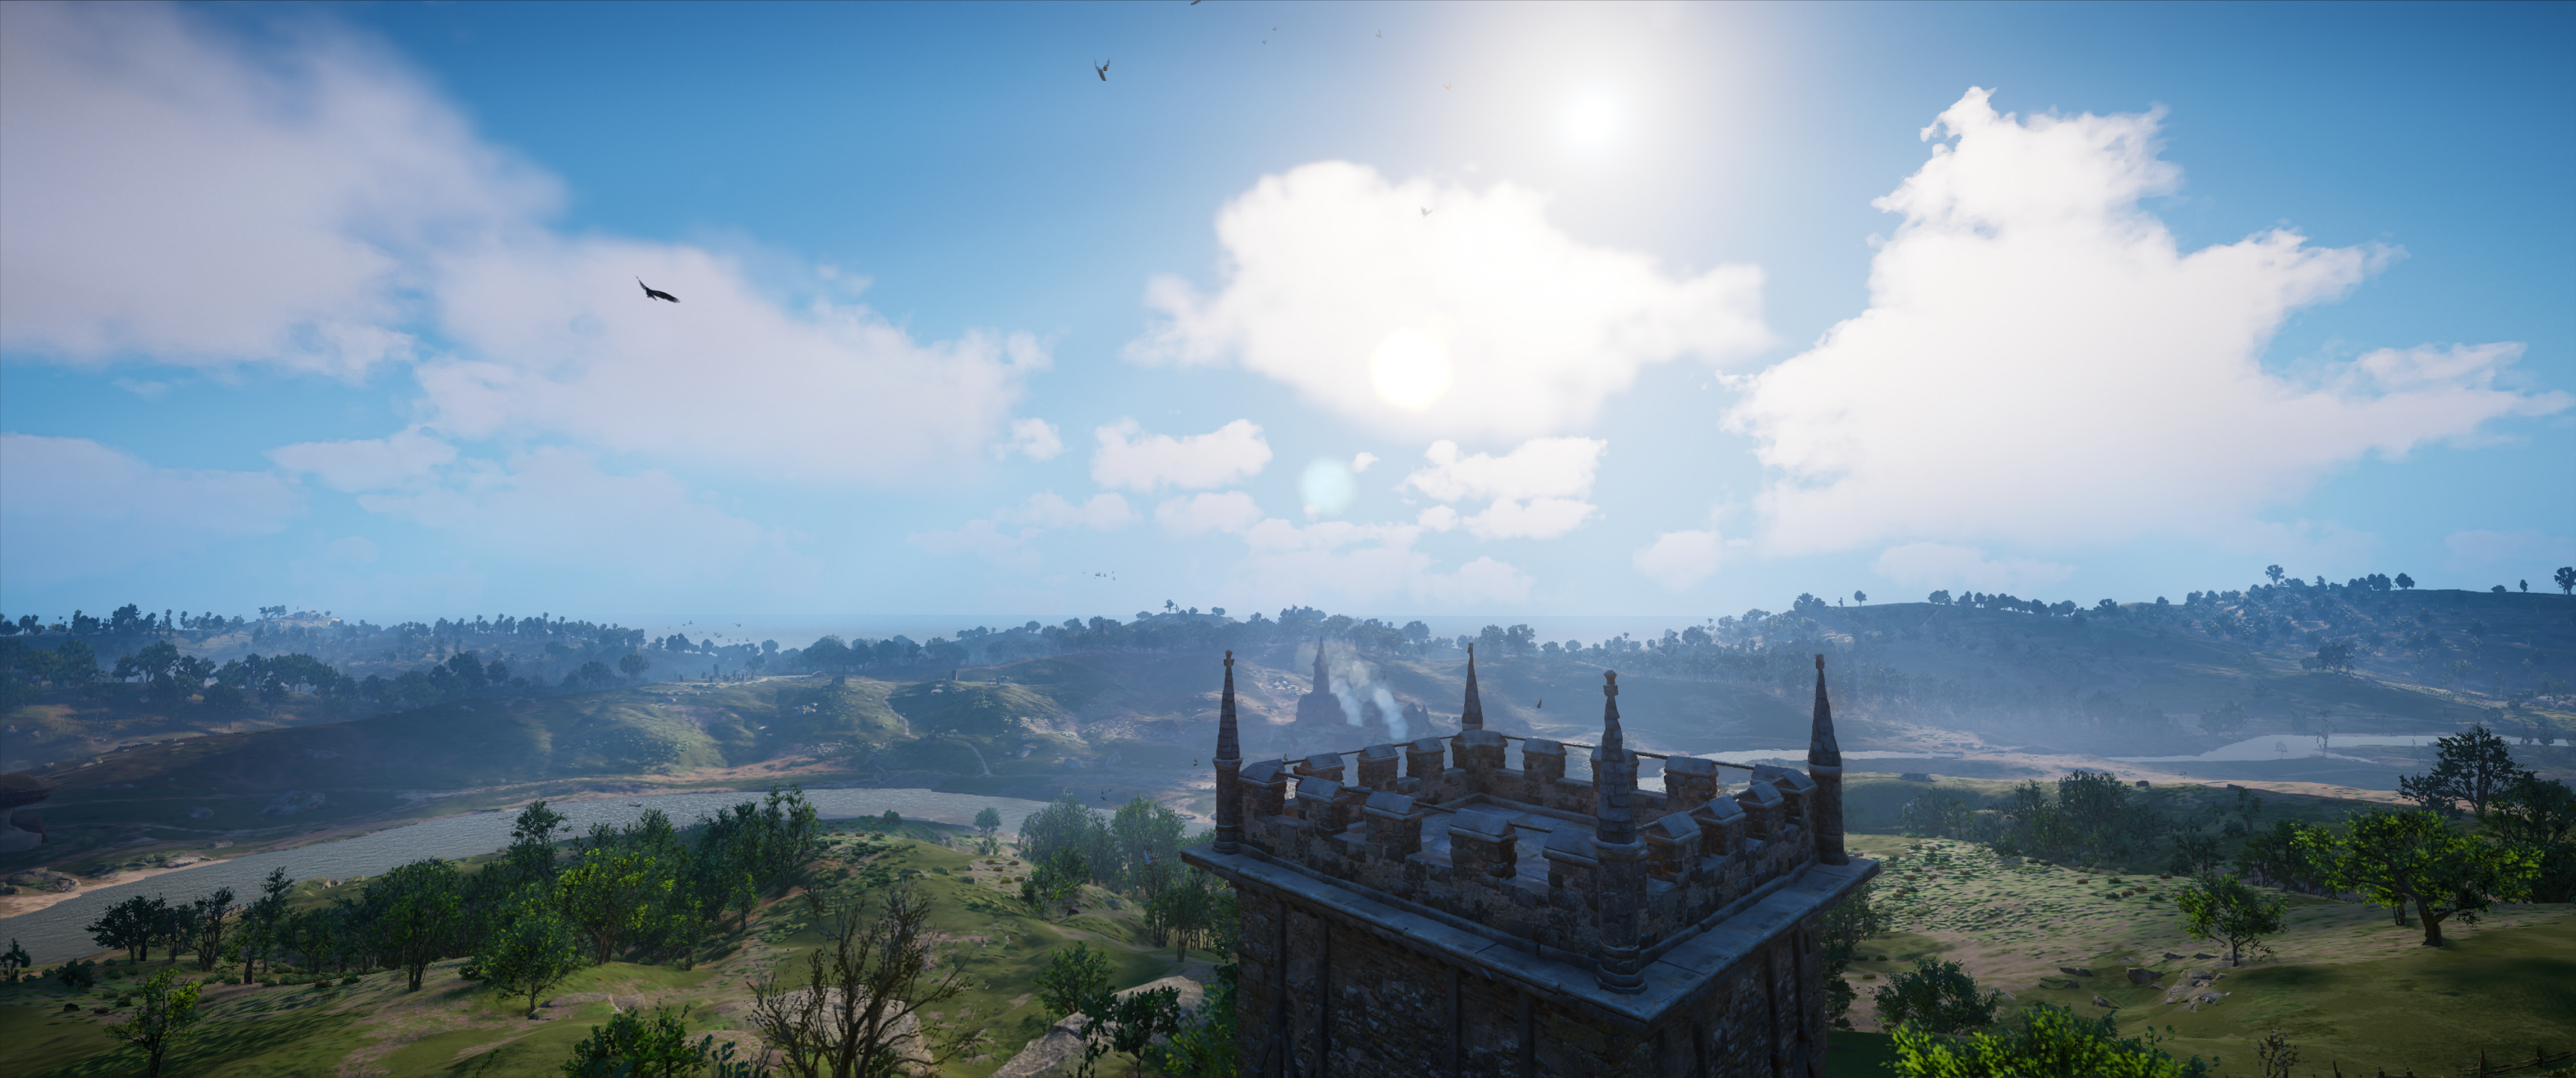 General 3440x1440 Assassin's Creed: Valhalla landscape sky mountains PC gaming